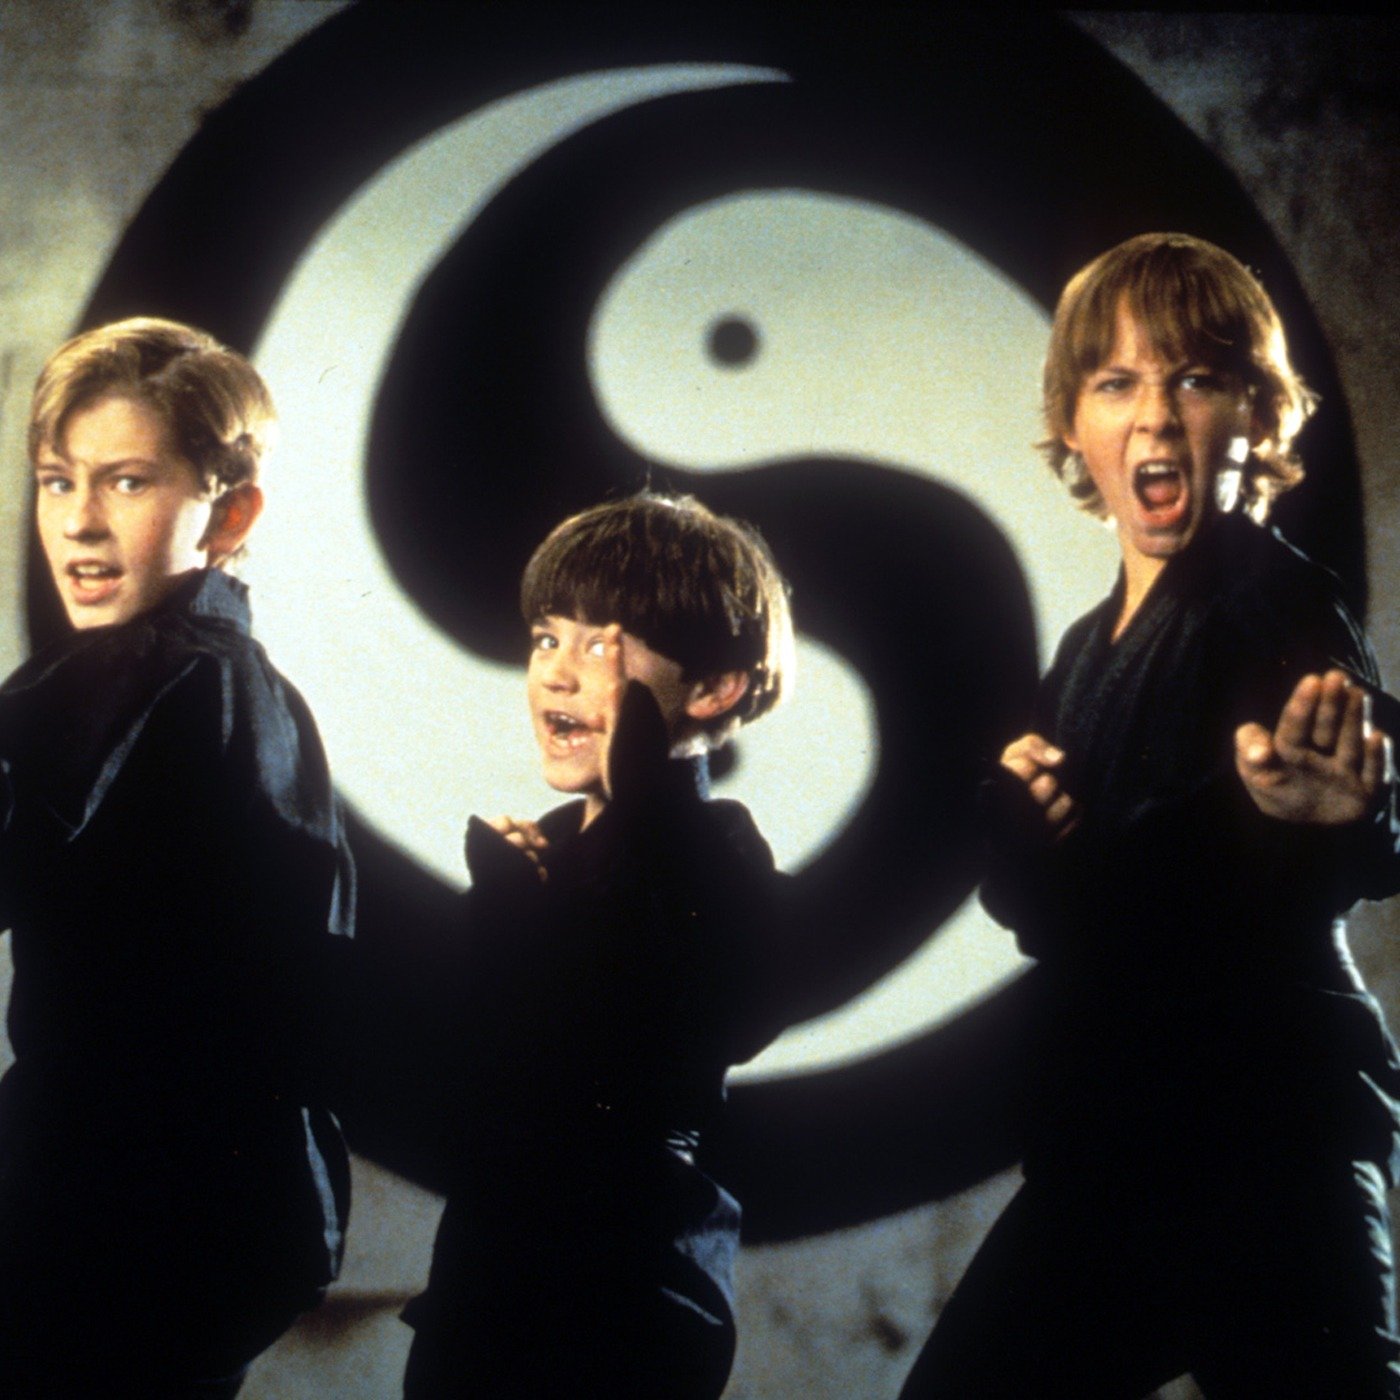 The Best Martial Arts Films for Kids | Kids Kung Fu Movies, Ranked